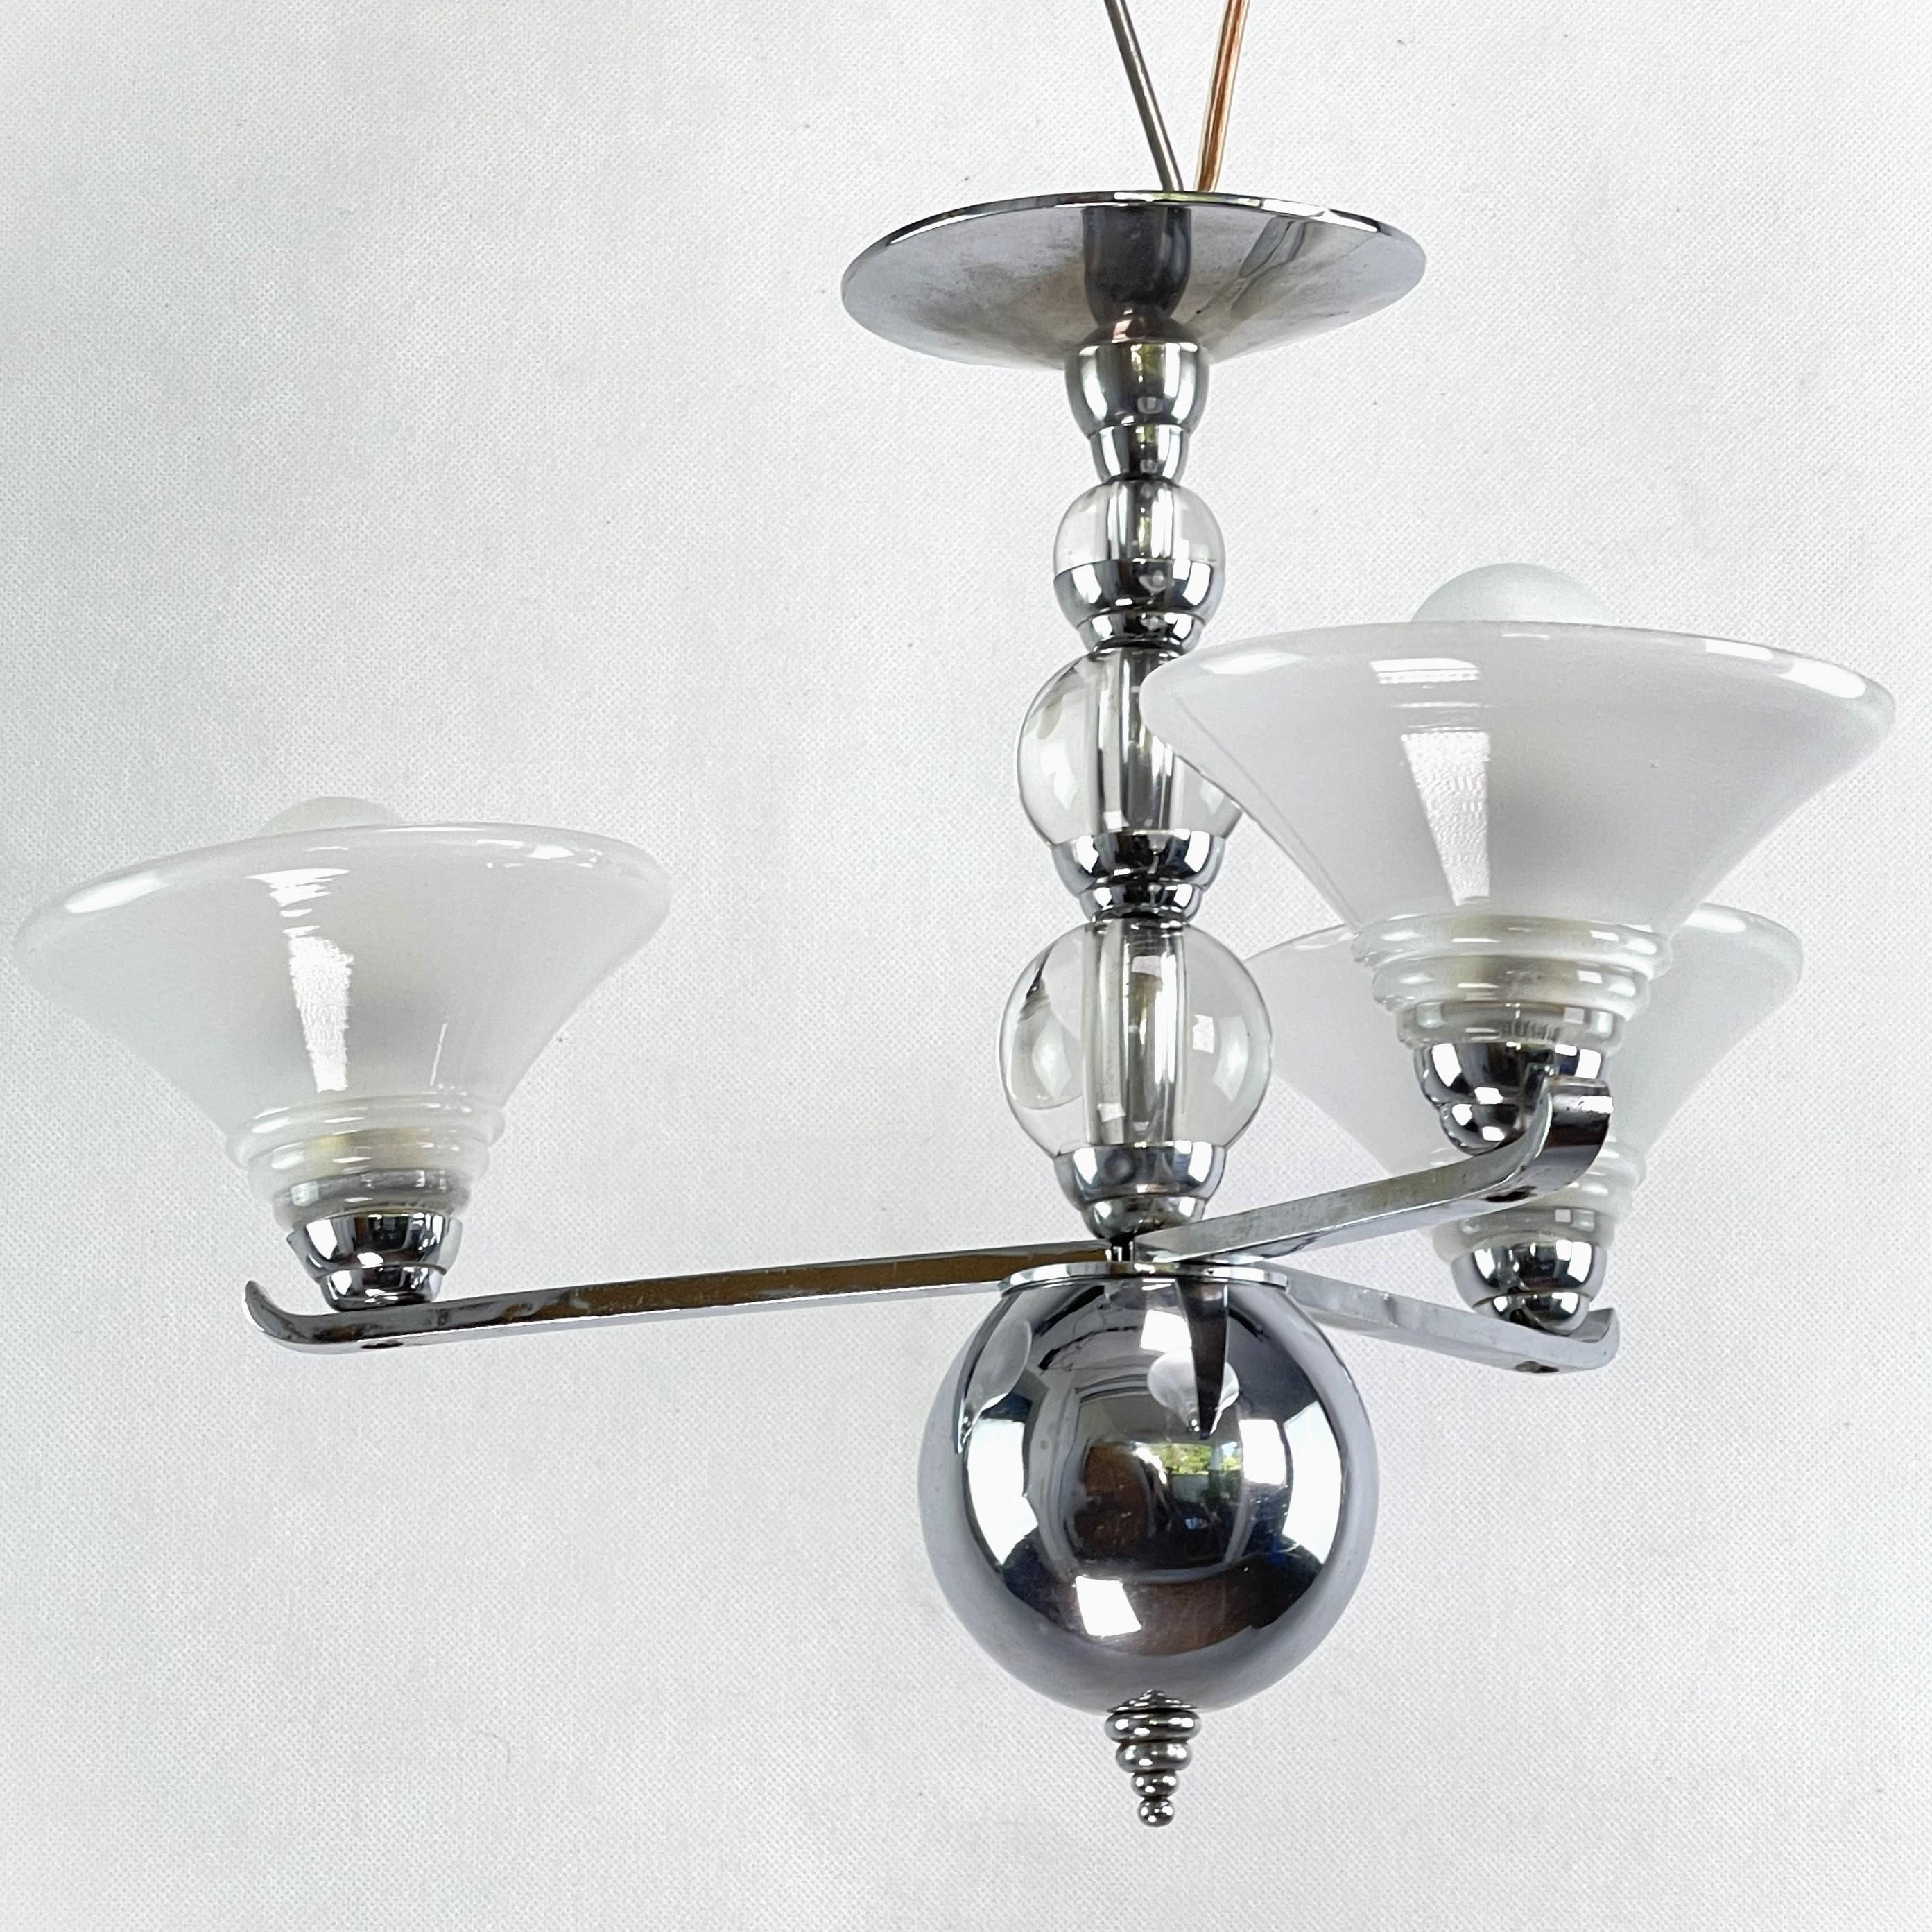 French Art Deco Ceiling Lamp with Glass Balls, Machine Age, 1920s For Sale